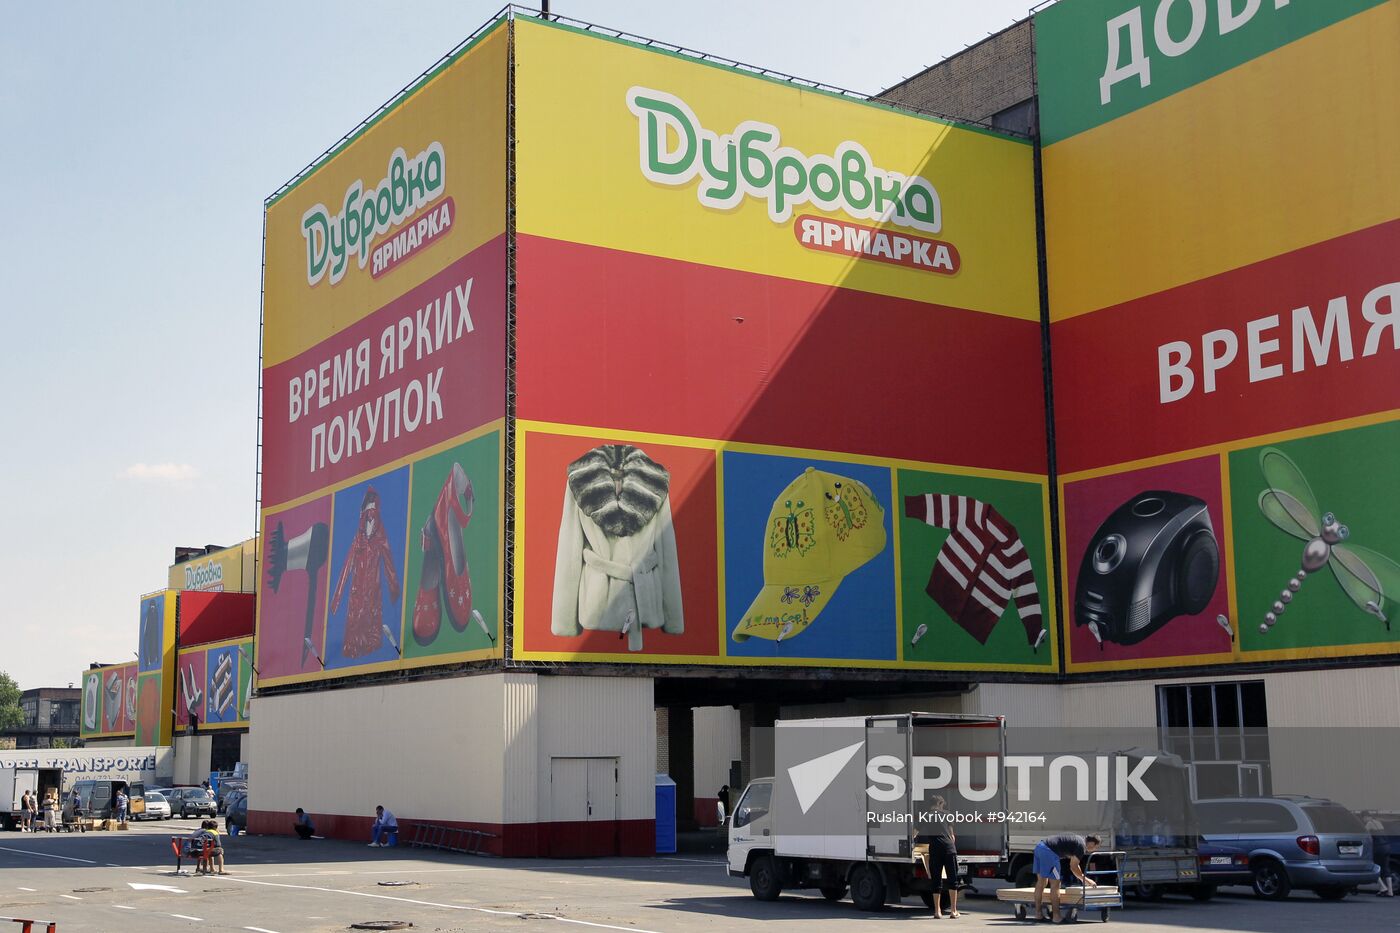 Dubrovka trading house, Moscow